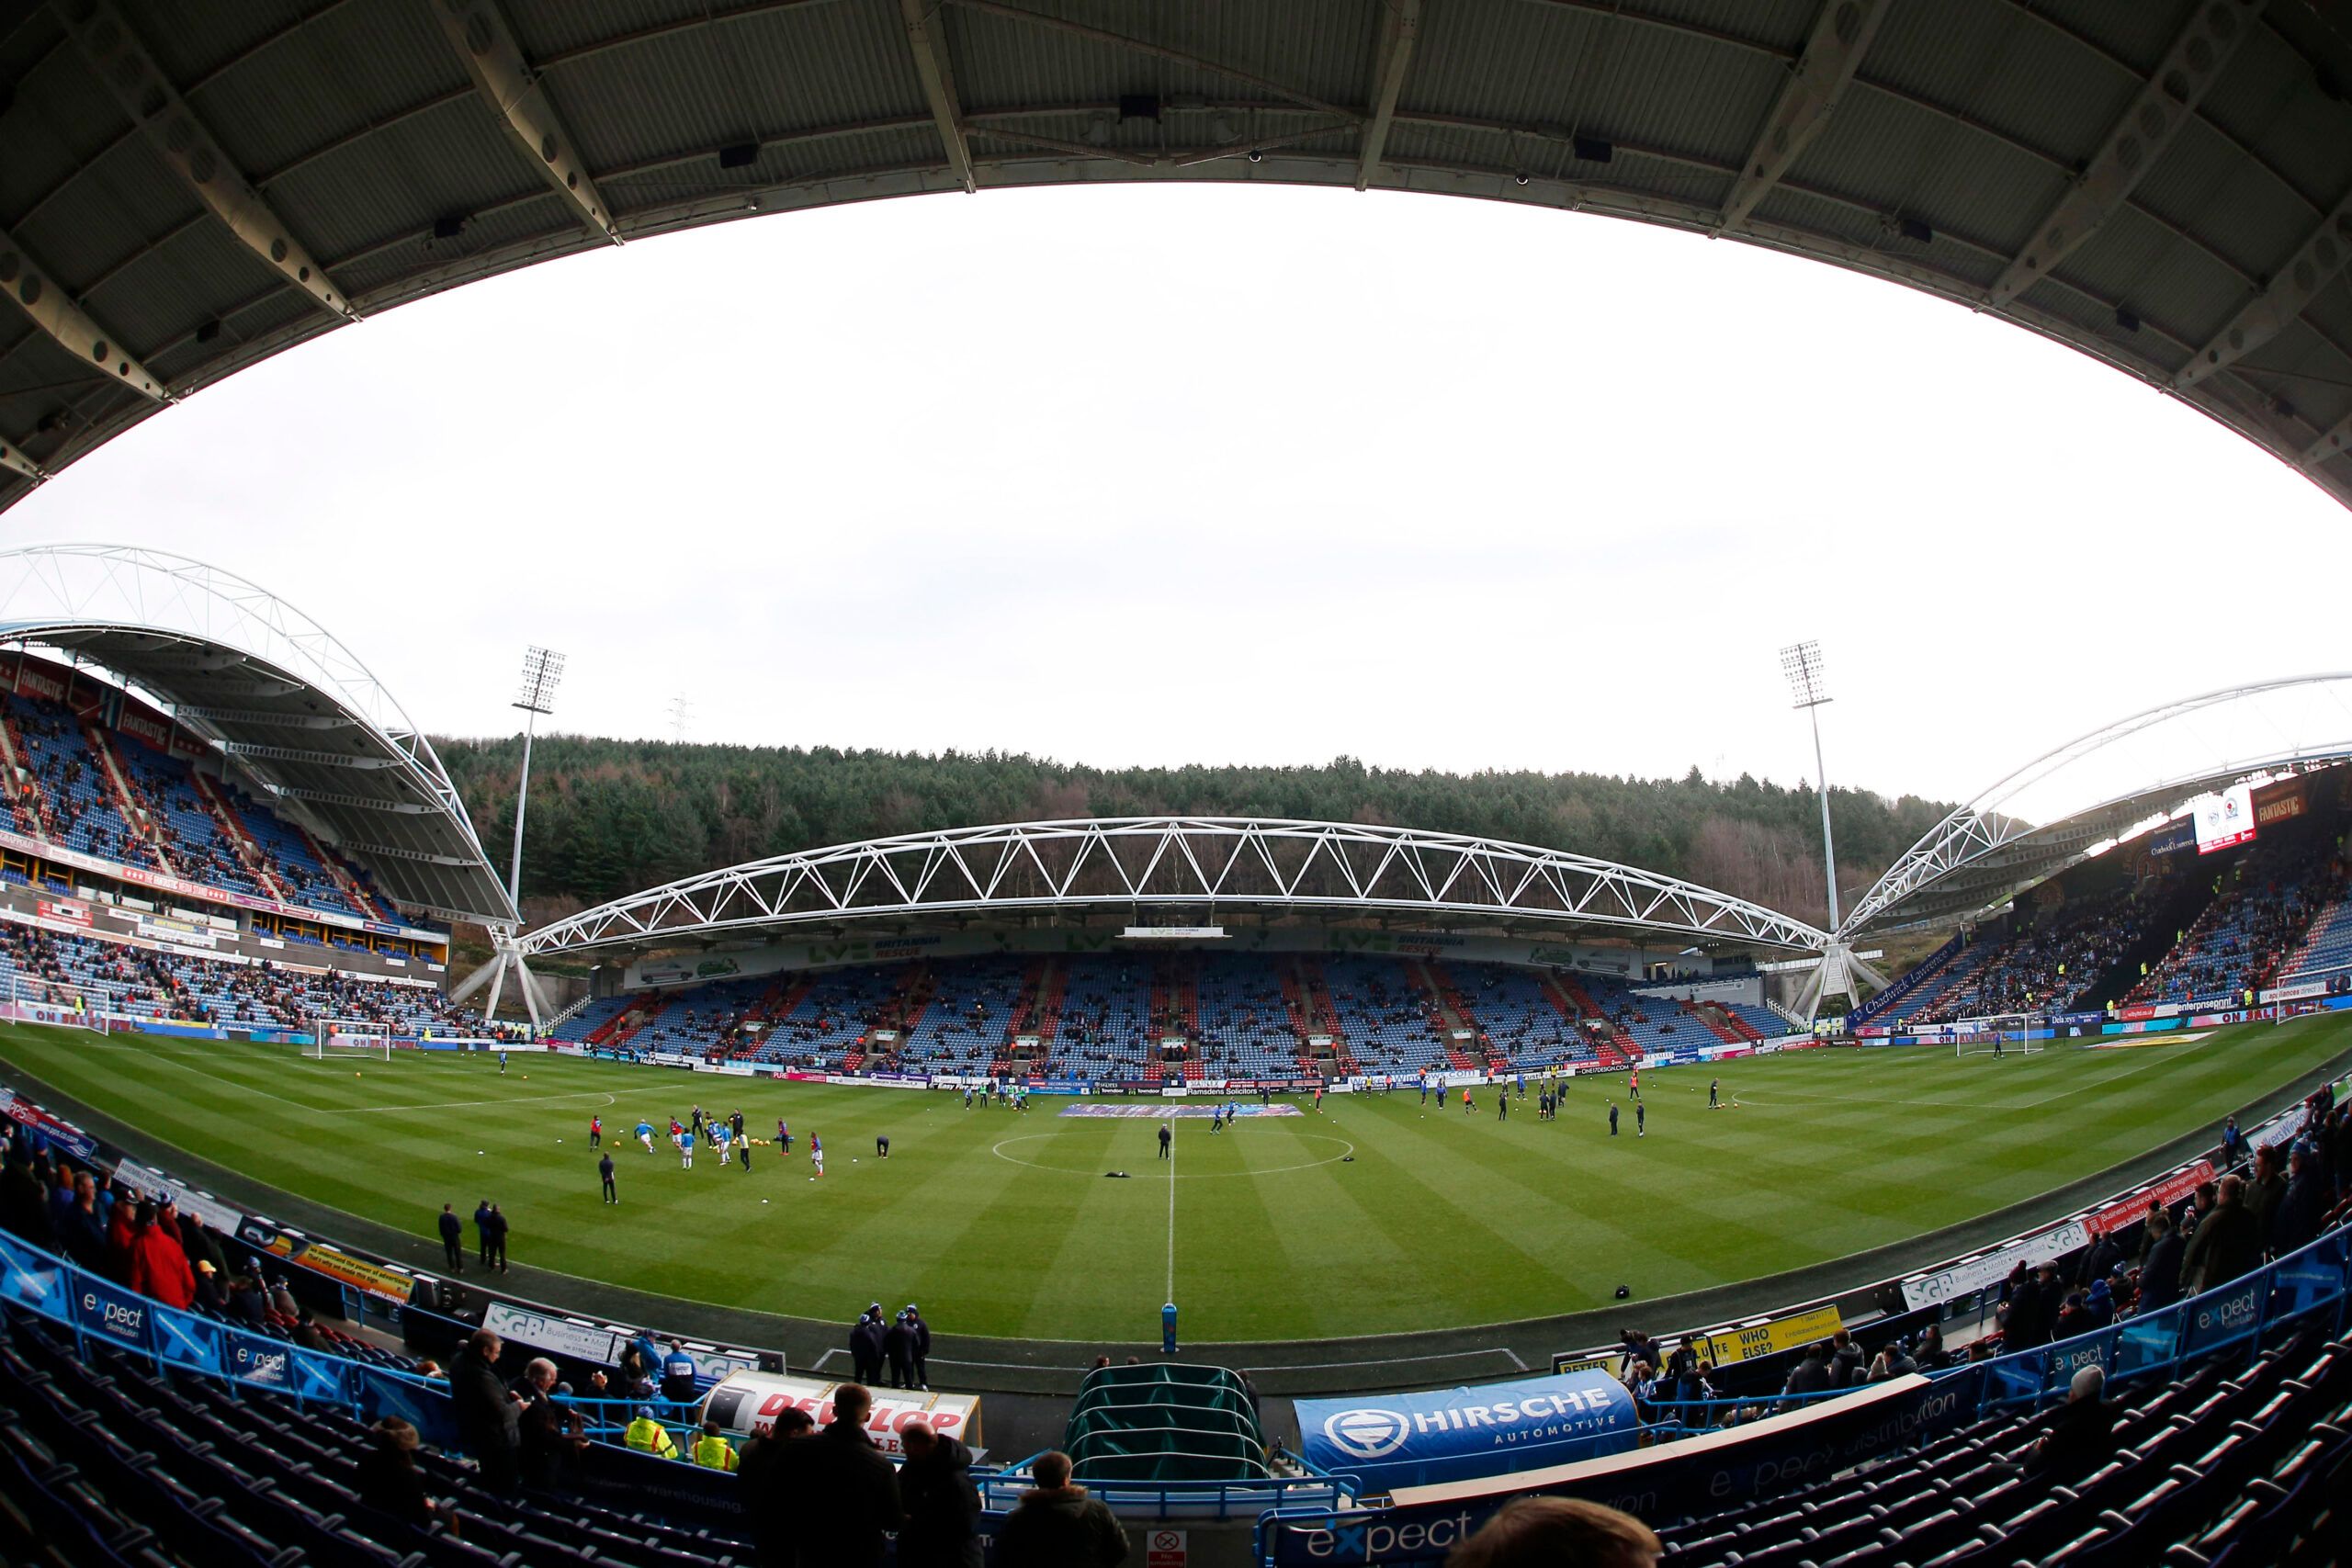 Britain Football Soccer - Huddersfield Town v Blackburn Rovers - Sky Bet Championship - The John Smith's Stadium - 31/12/16 General view of the stadium ahead of the match Mandatory Credit: Action Images / Craig Brough Livepic EDITORIAL USE ONLY. No use with unauthorized audio, video, data, fixture lists, club/league logos or 